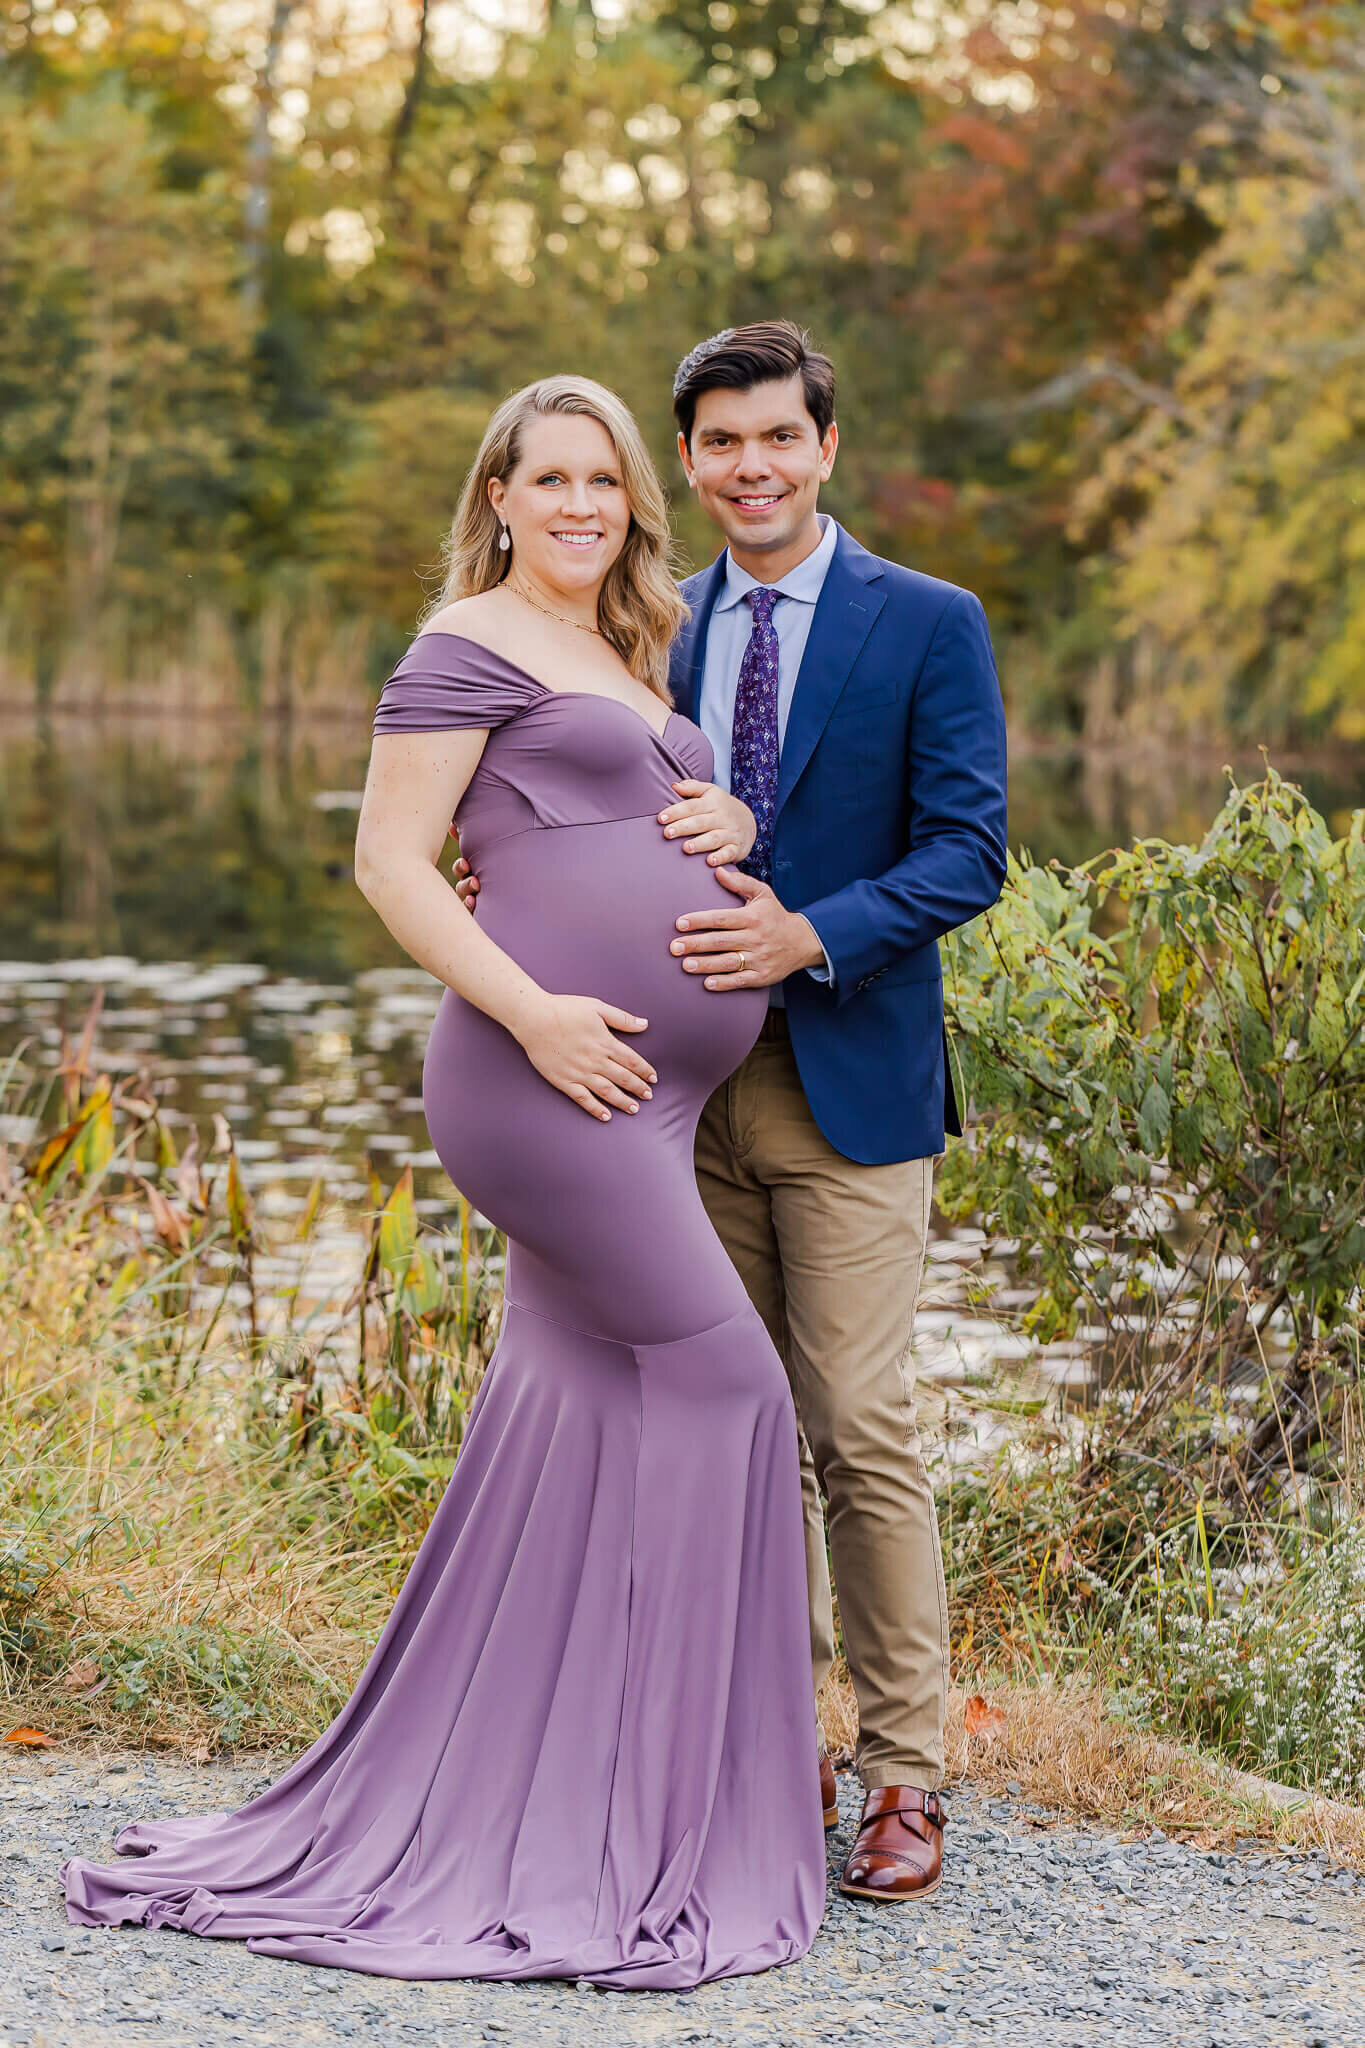 A maternity portrait session of a woman in purple with her husband.